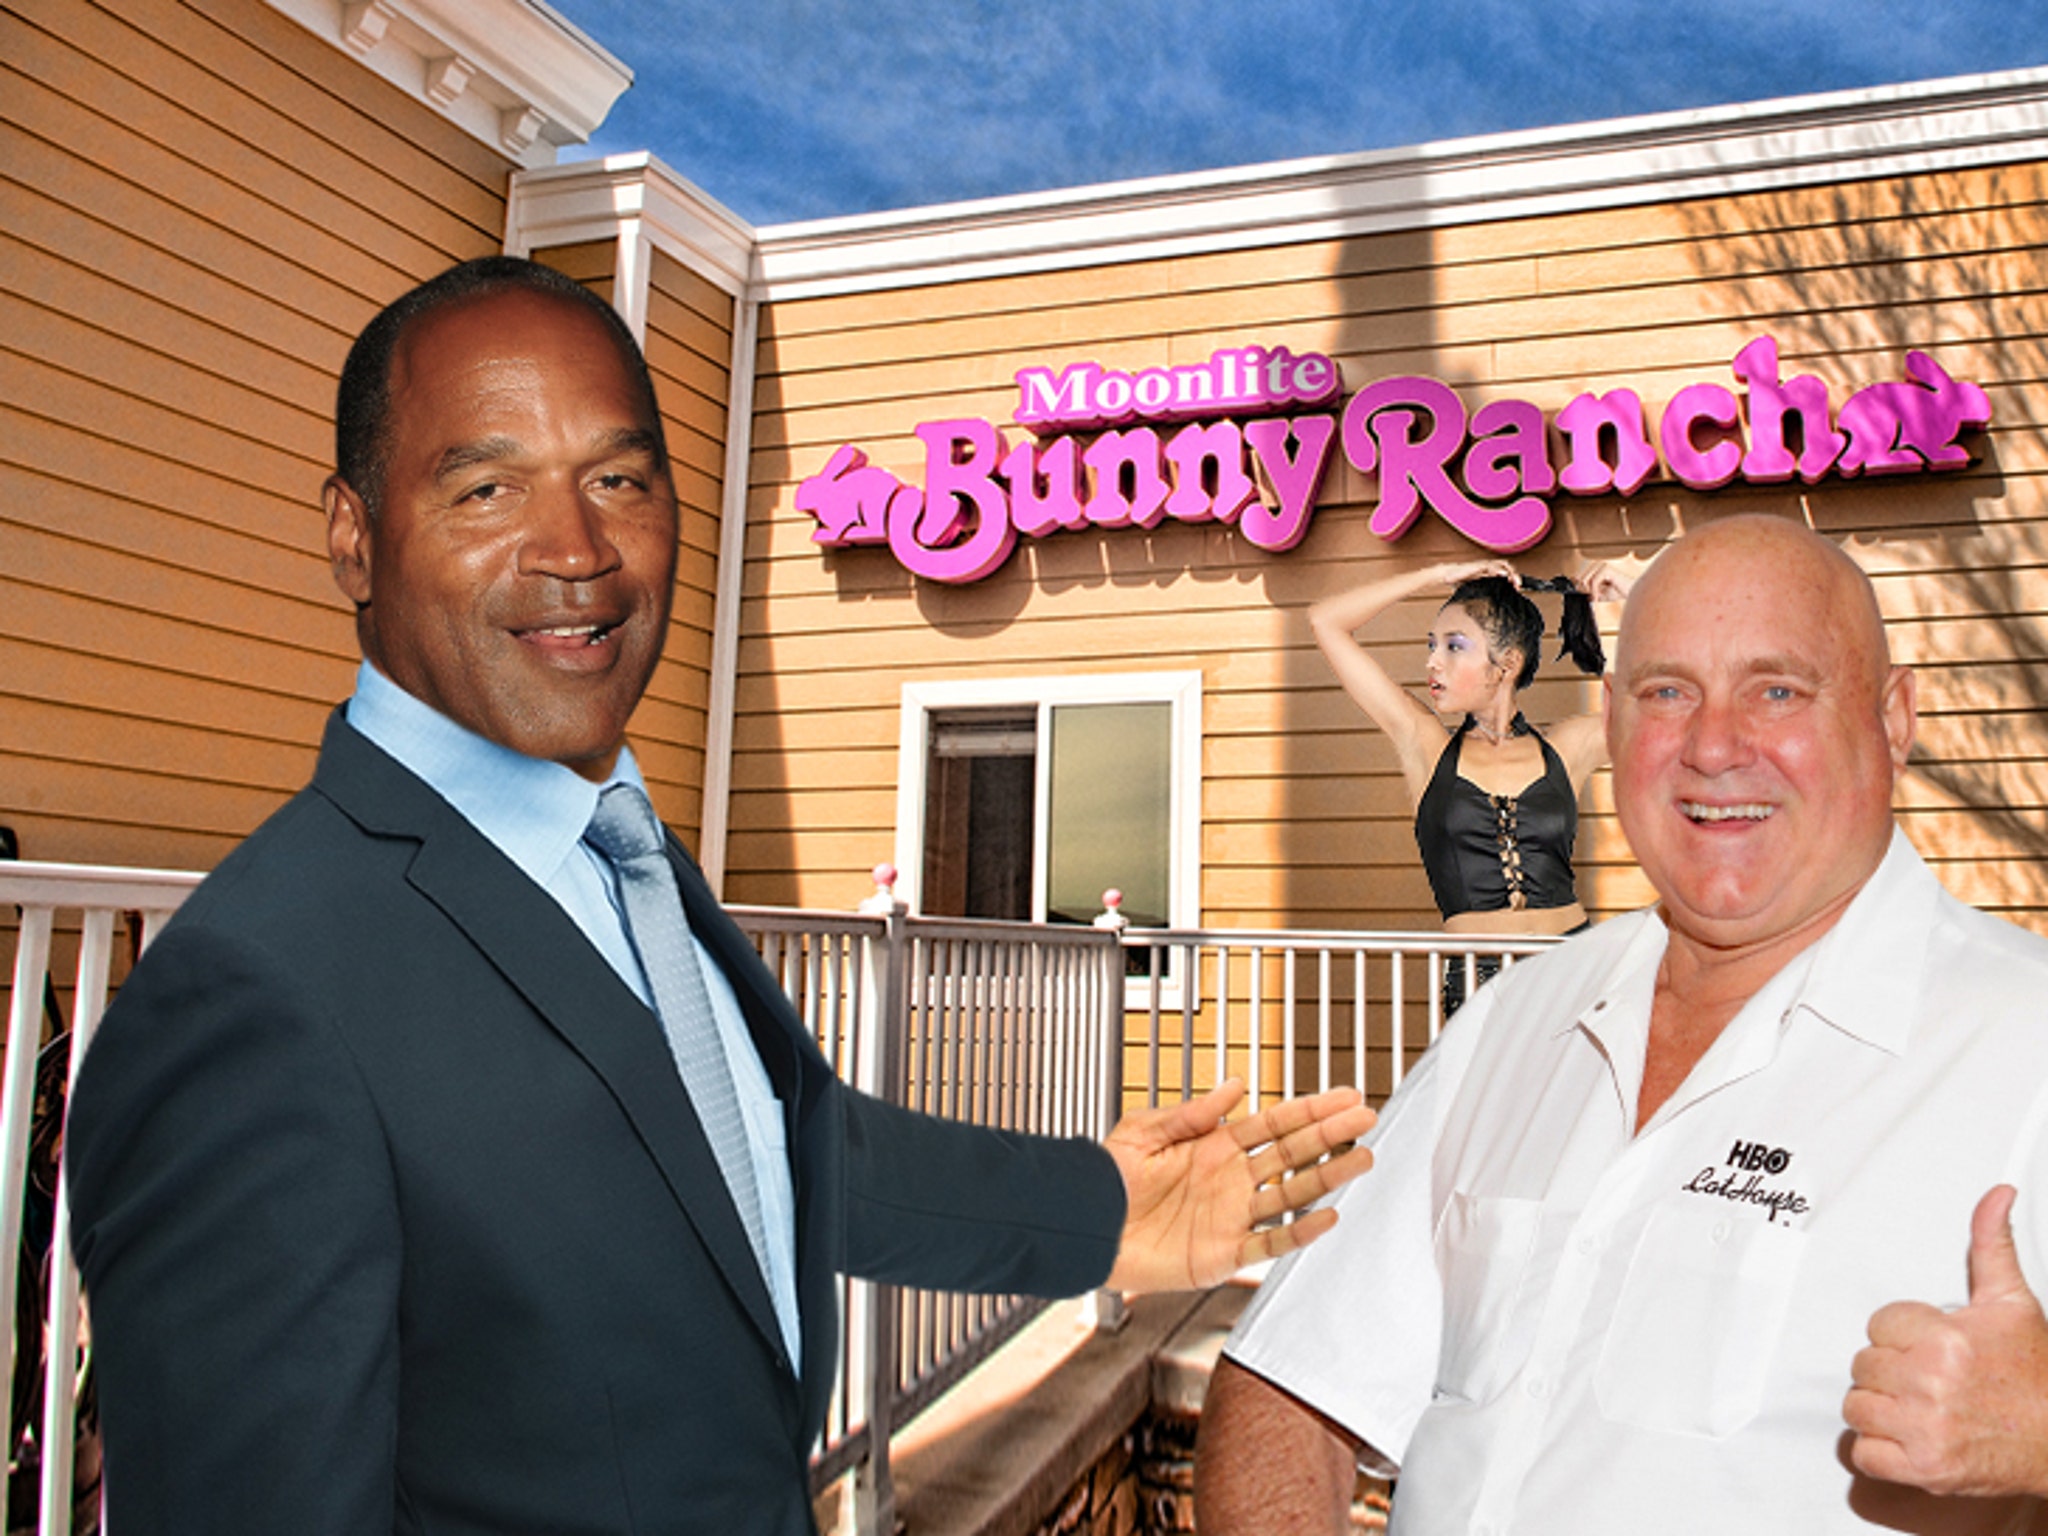 chad brinson recommends How Much Bunny Ranch